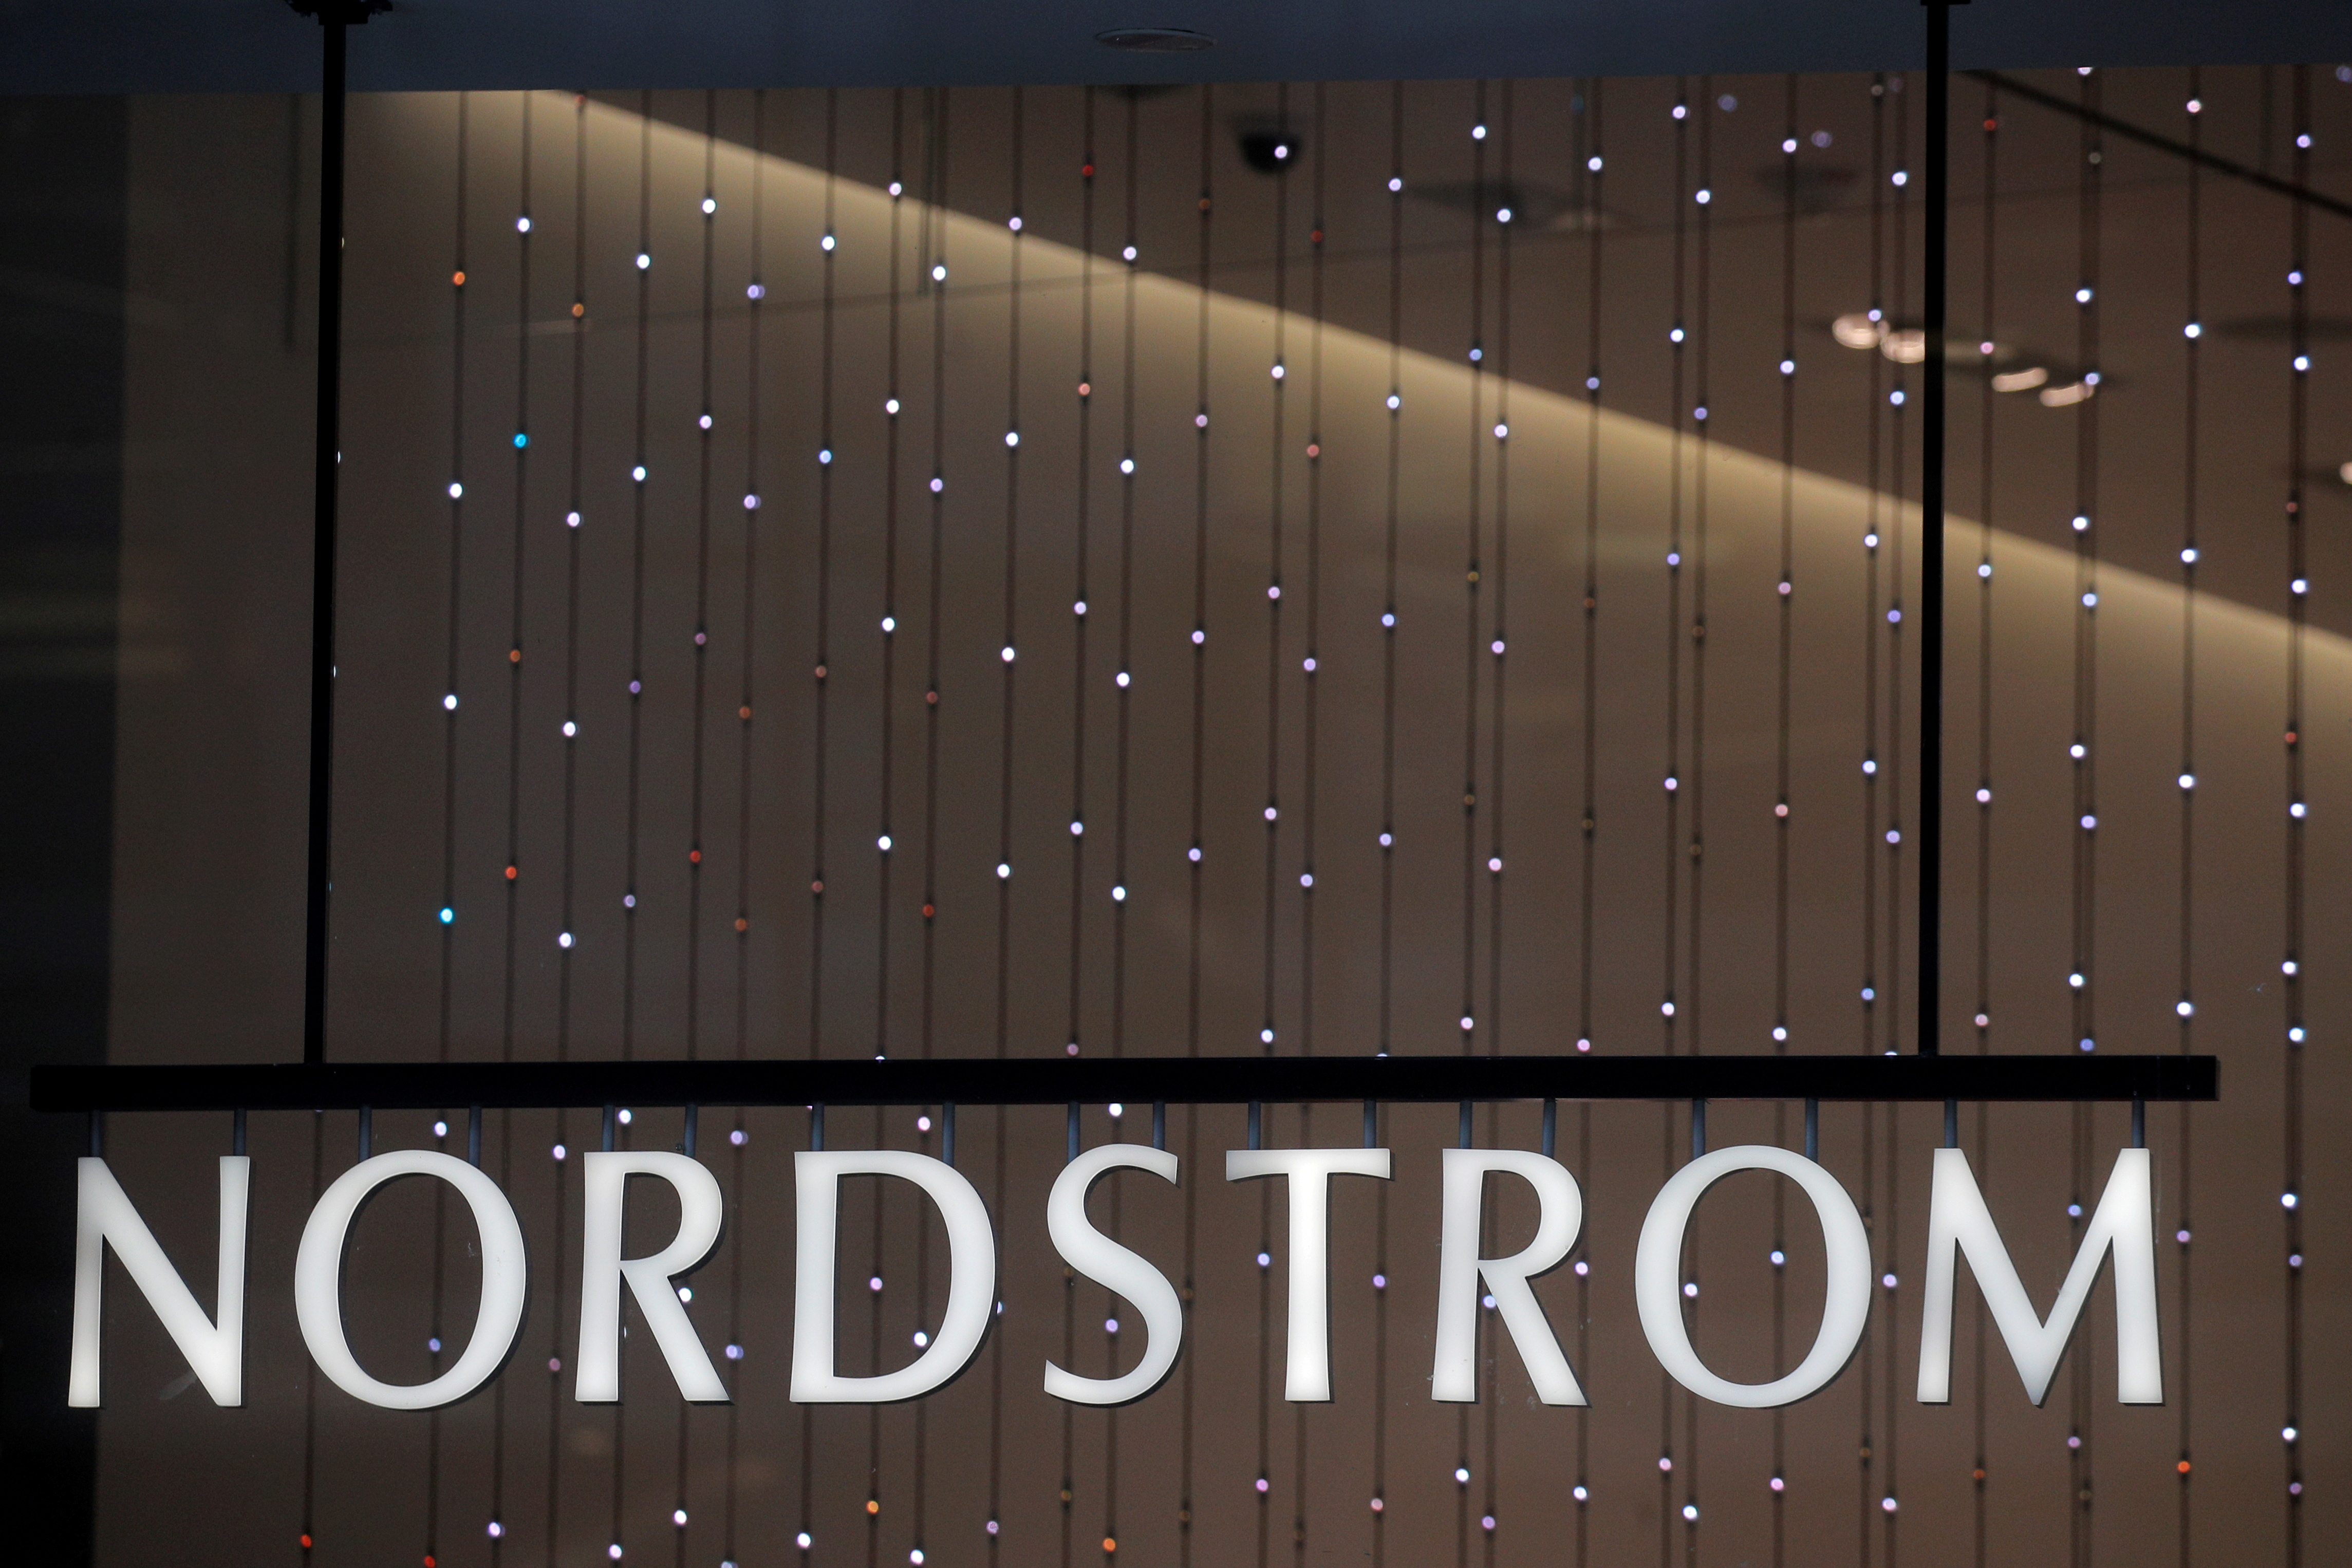 Exclusive-Nordstrom's founding family in new bid to take U.S. retailer  private, sources say By Reuters